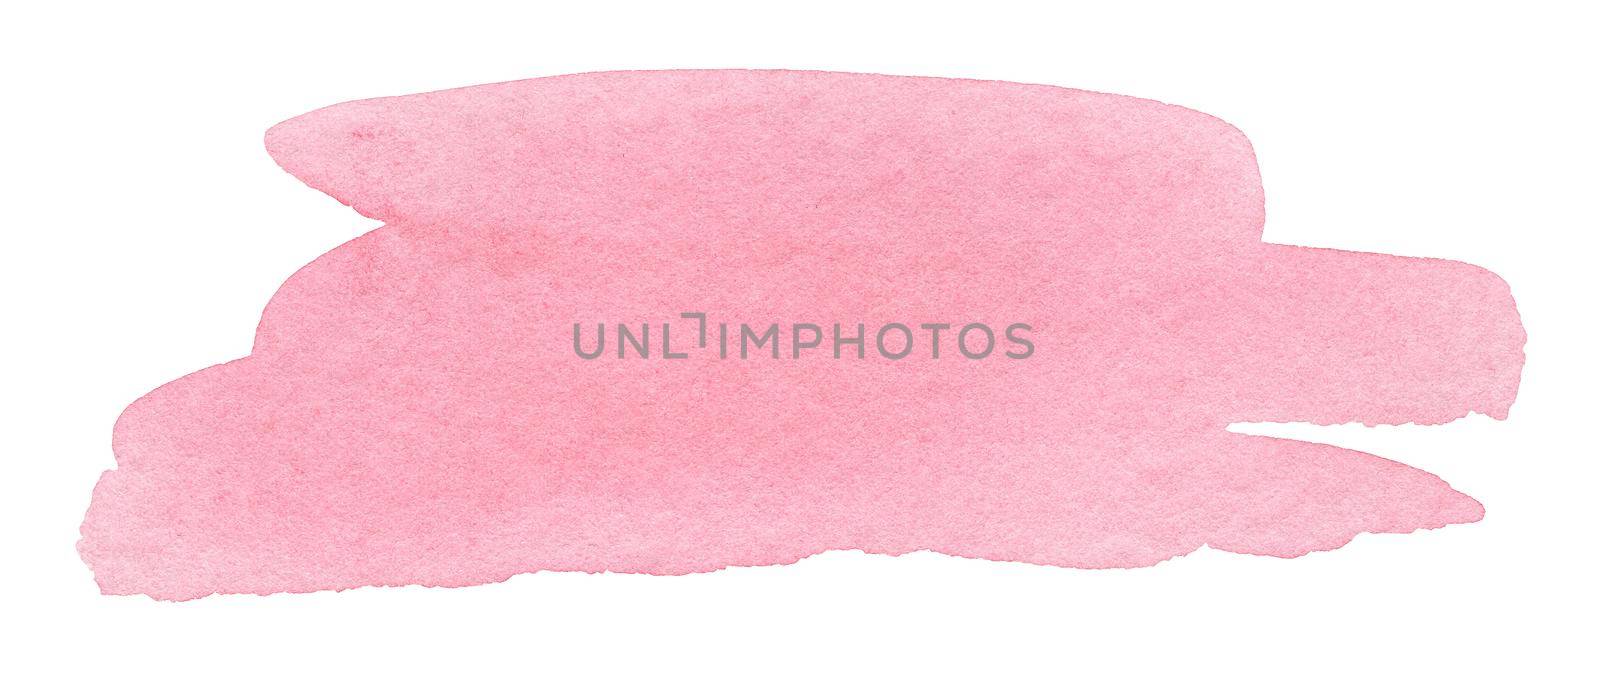 watercolor pink splash isolated on white background